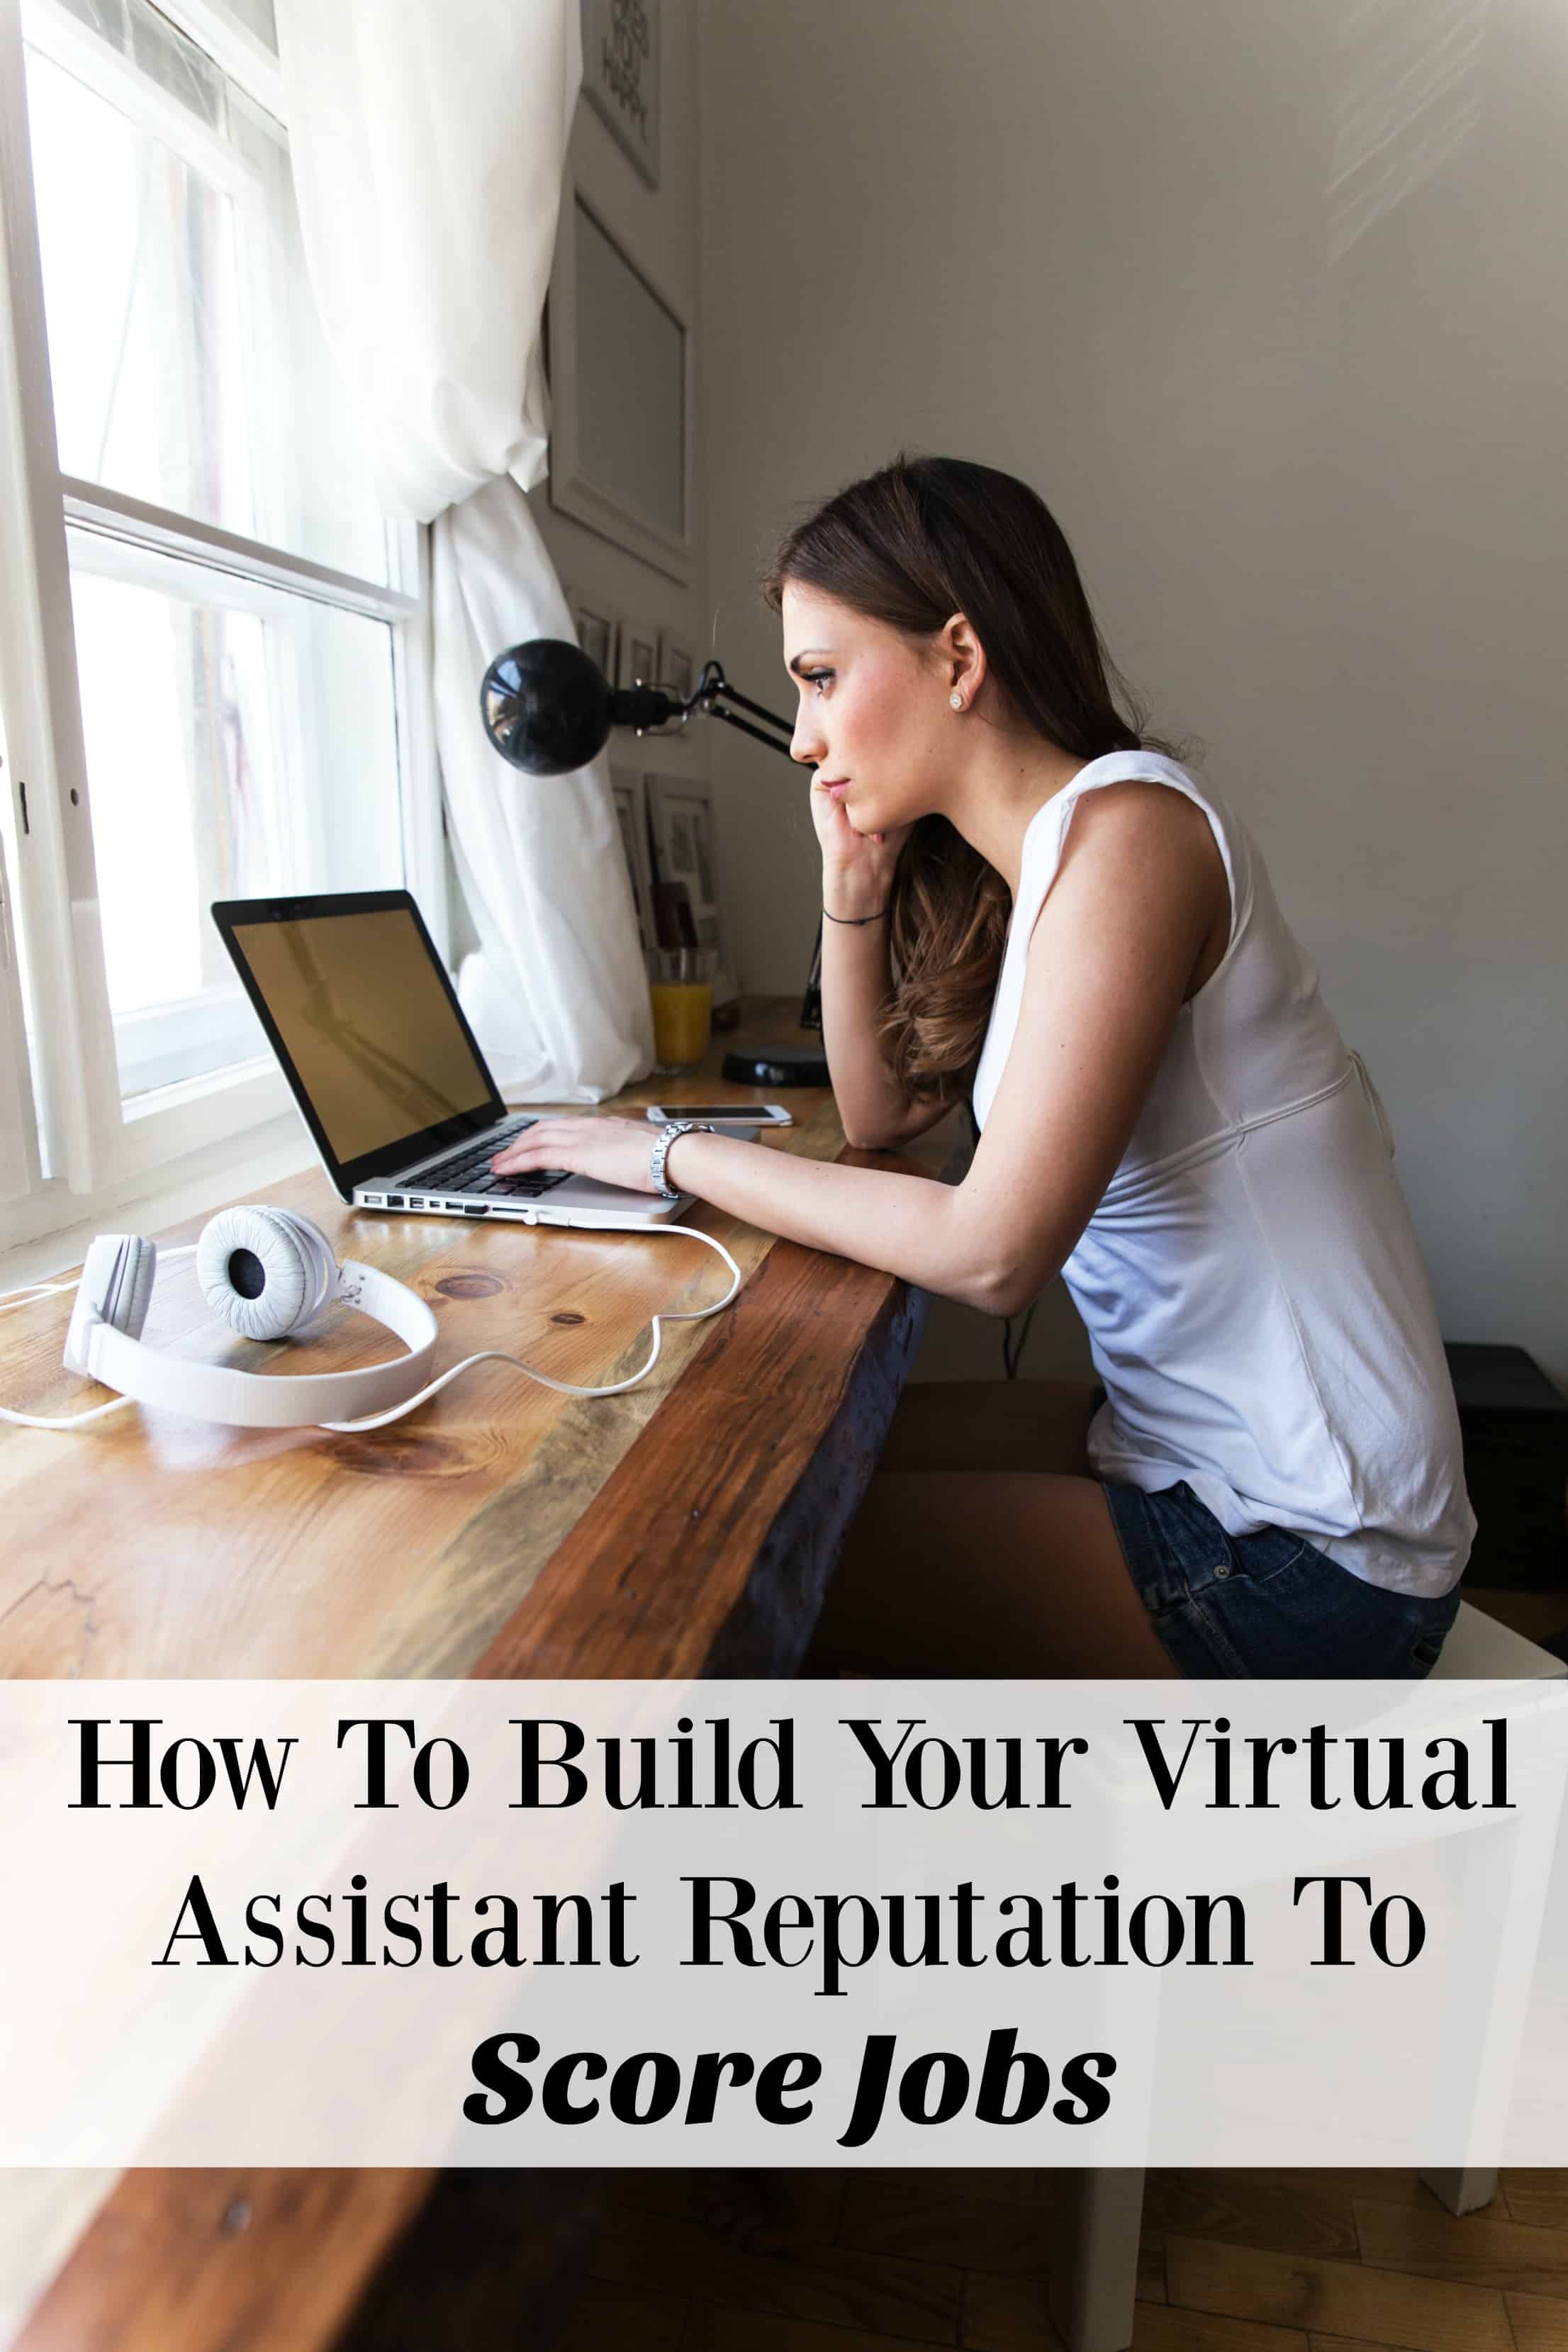 Learn how to build your virtual assistant reputation to score jobs and make money from home! It's simple - anyone can do it!